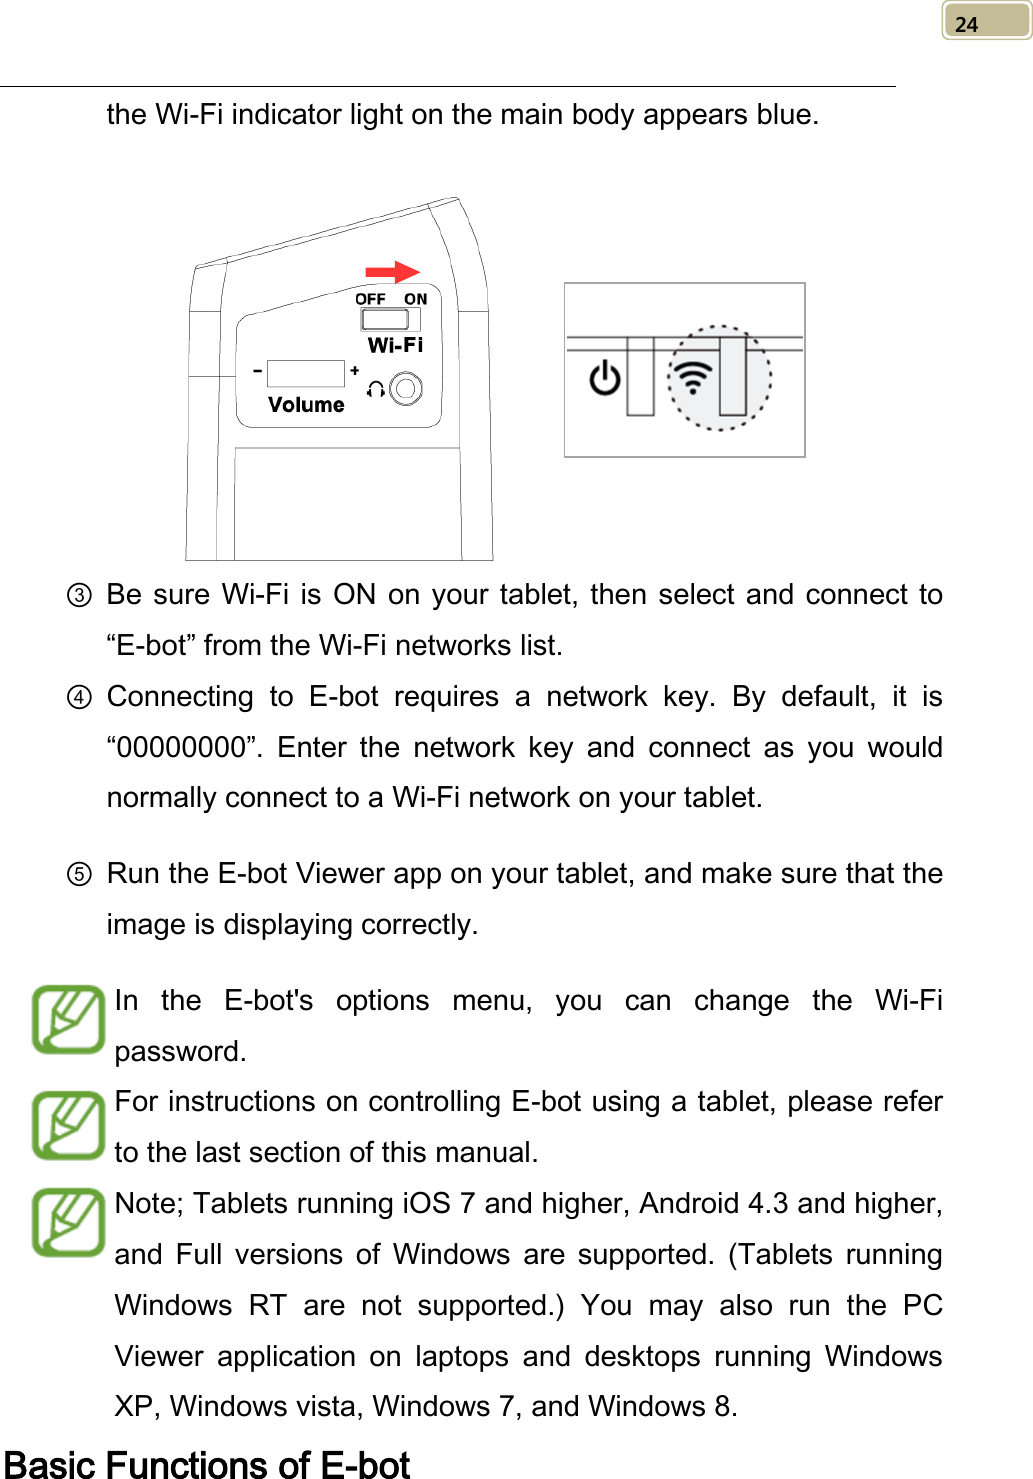   24 the Wi-Fi indicator light on the main body appears blue.     ③ Be sure Wi-Fi is ON on your tablet, then select and connect to “E-bot” from the Wi-Fi networks list.   ④ Connecting to E-bot requires a network key. By default, it is “00000000”.  Enter the network key and connect as you would normally connect to a Wi-Fi network on your tablet. ⑤ Run the E-bot Viewer app on your tablet, and make sure that the image is displaying correctly.   In the E-bot&apos;s options menu, you can change the Wi-Fi password.   For instructions on controlling E-bot using a tablet, please refer to the last section of this manual. Note; Tablets running iOS 7 and higher, Android 4.3 and higher, and Full versions of Windows are supported. (Tablets running Windows RT are not supported.) You may also run the PC Viewer application on laptops and desktops running Windows XP, Windows vista, Windows 7, and Windows 8. Basic Functions of E-bot 